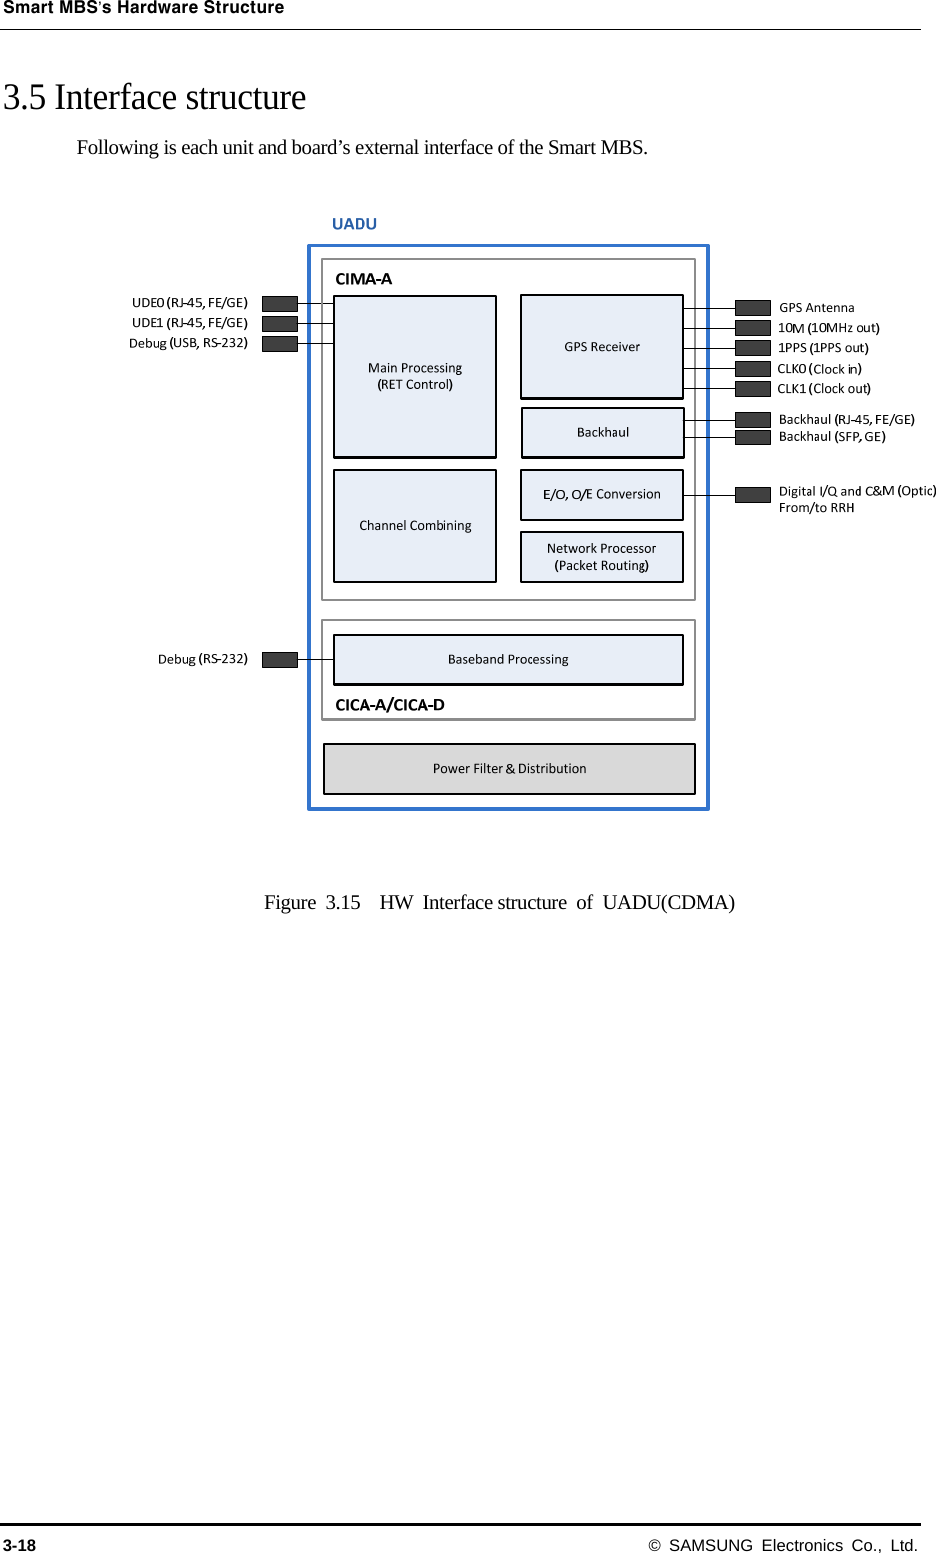 Smart MBS’s Hardware Structure 3-18 © SAMSUNG Electronics Co., Ltd. 3.5 Interface structure Following is each unit and board’s external interface of the Smart MBS.   Figure 3.15  HW Interface structure of UADU(CDMA) 